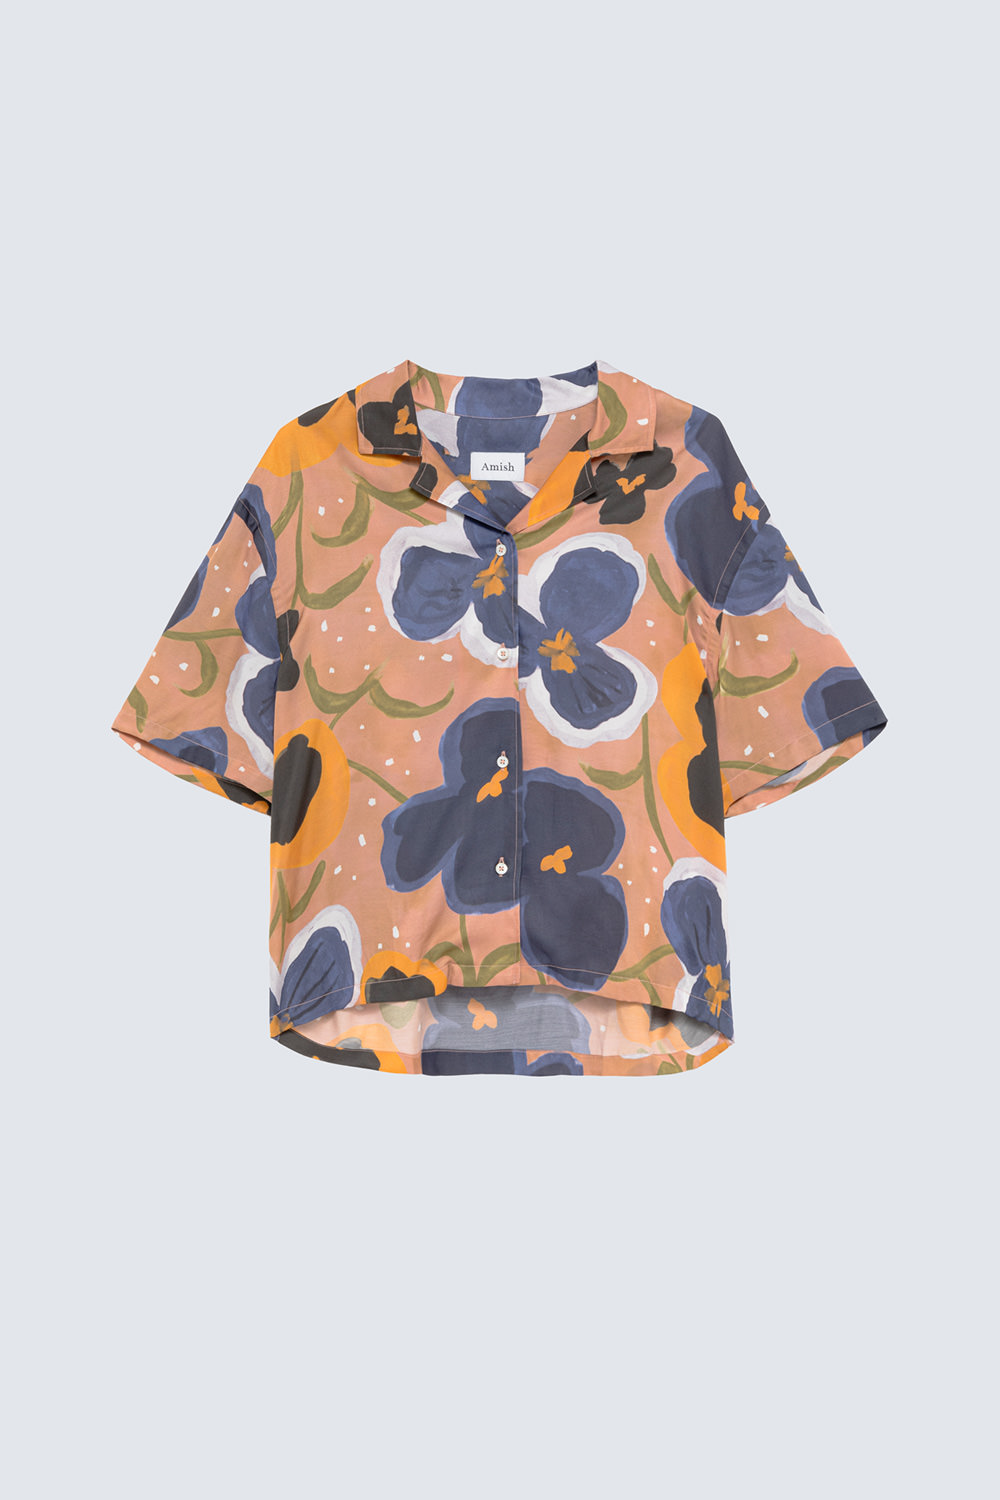 AMISH: PAINTED FLOWER BOWLING SHIRT